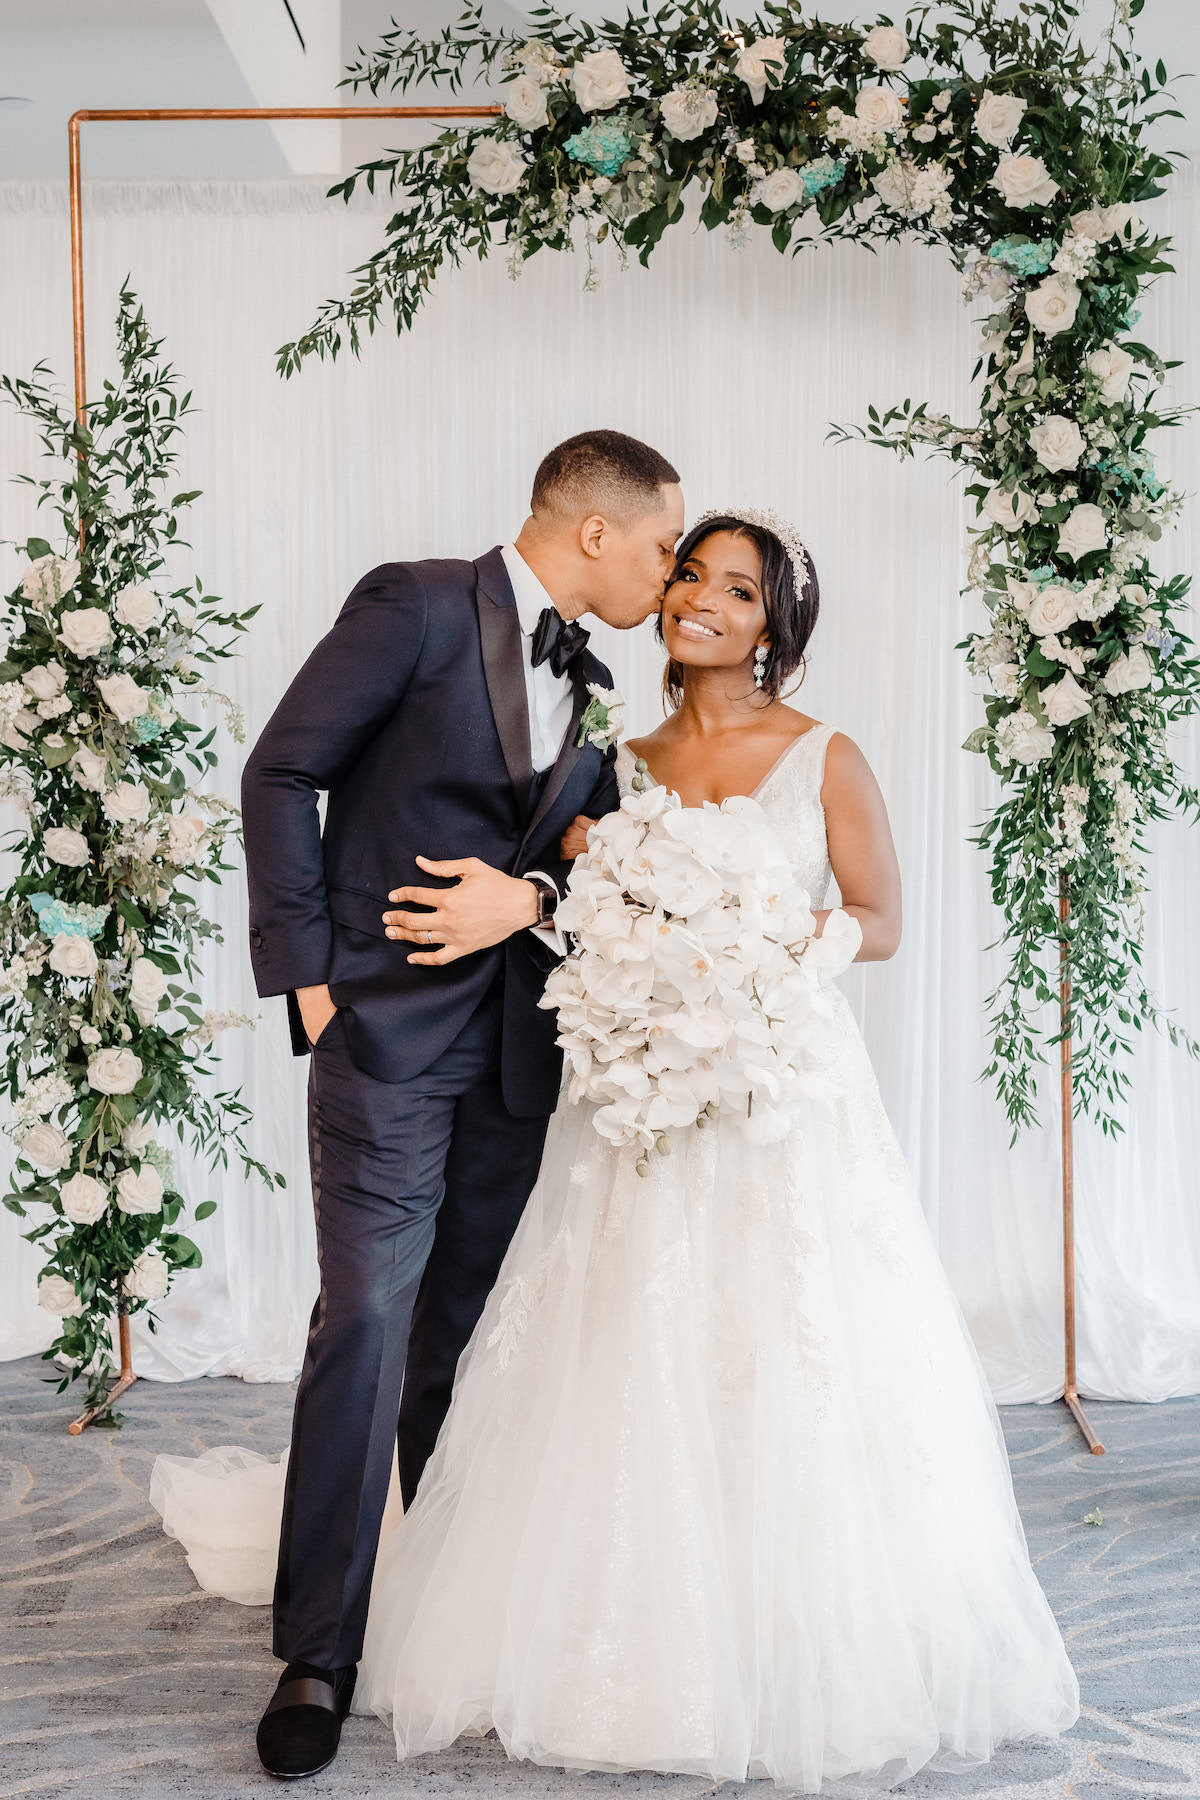 Luxury bride and groom portrait with floral arch - Tunji Studio Photography